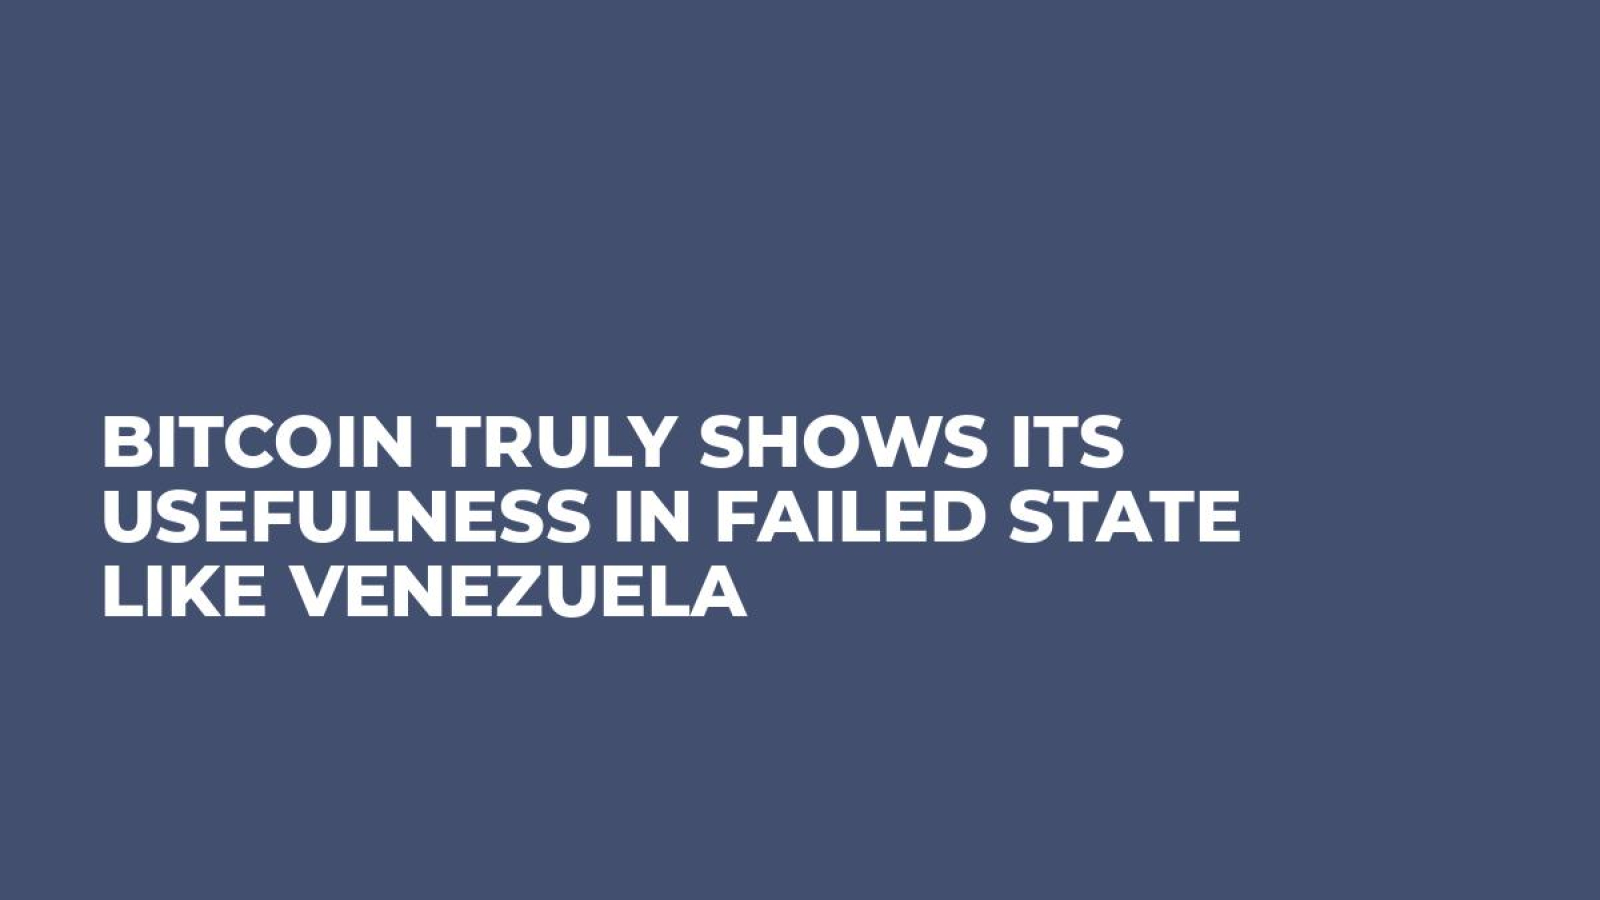 Bitcoin Truly Shows its Usefulness in Failed State Like Venezuela